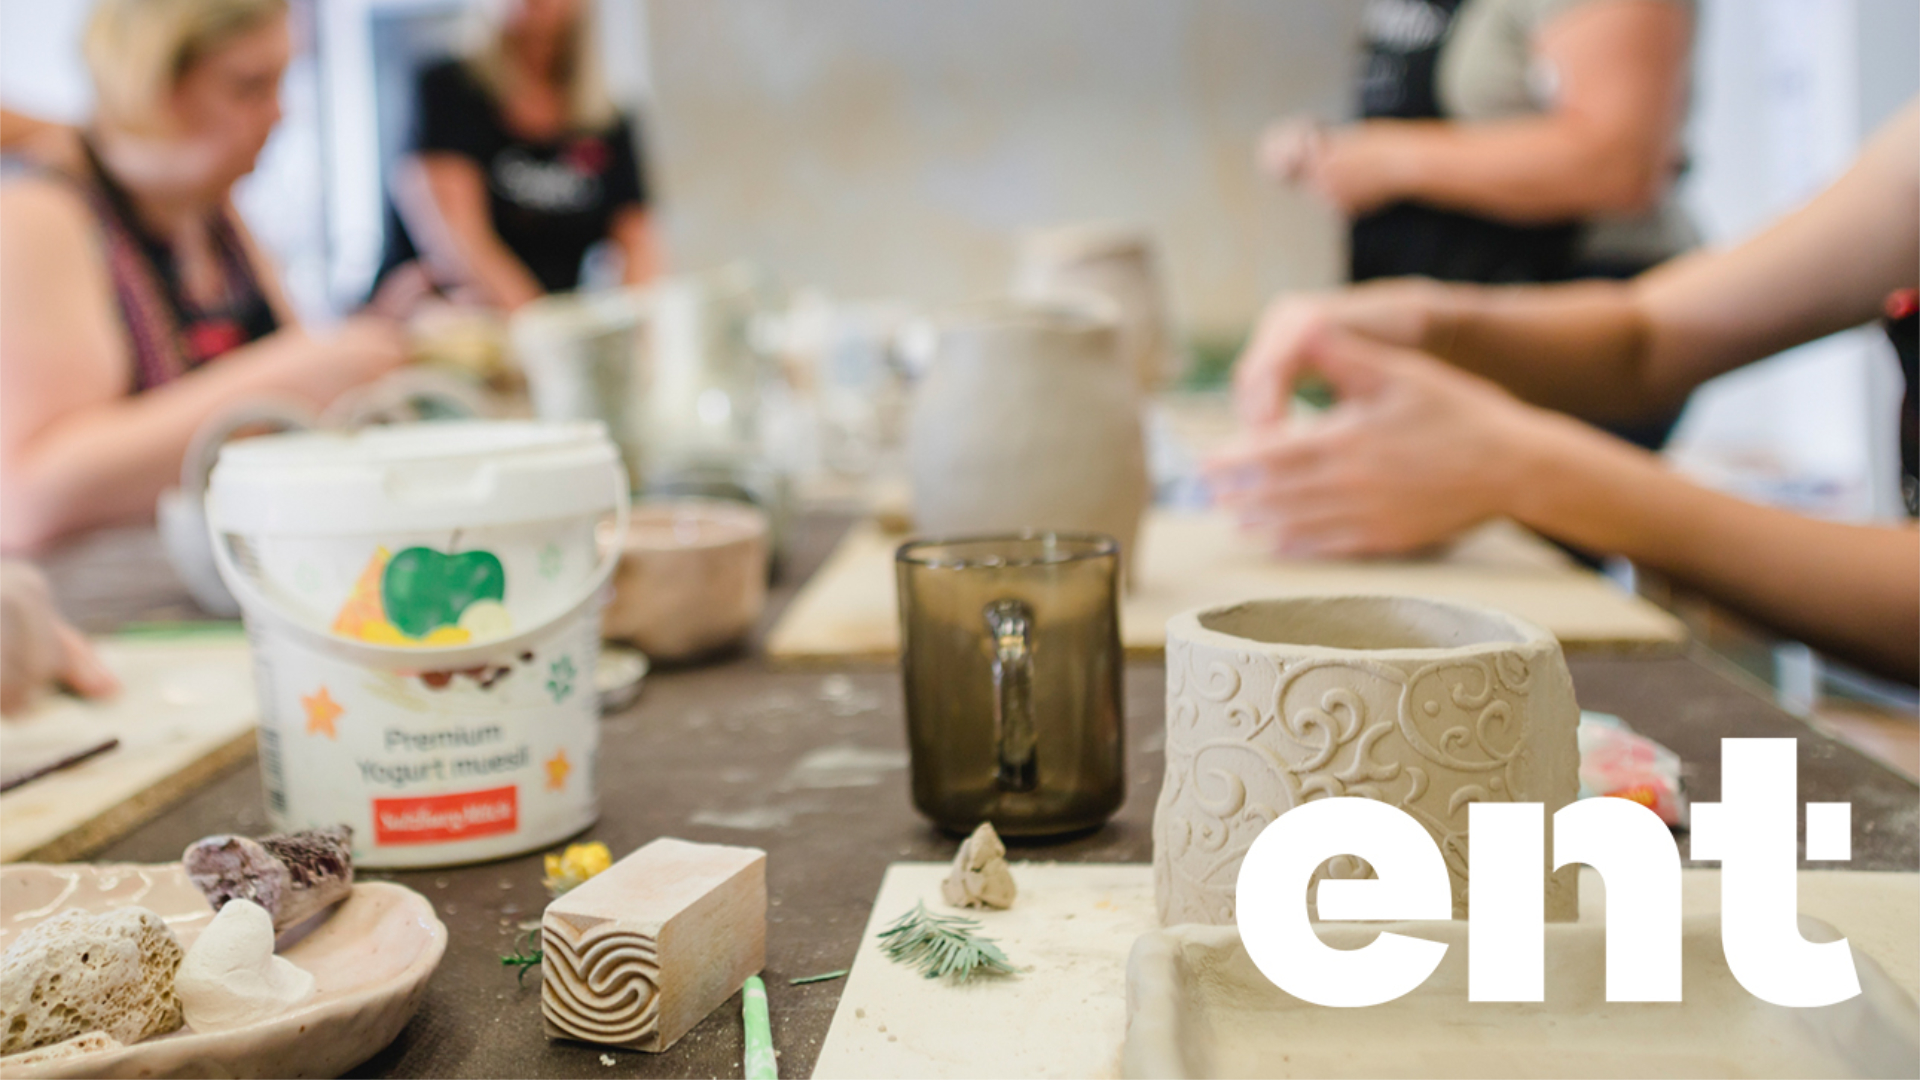 Workshop | “Pinched Pottery”